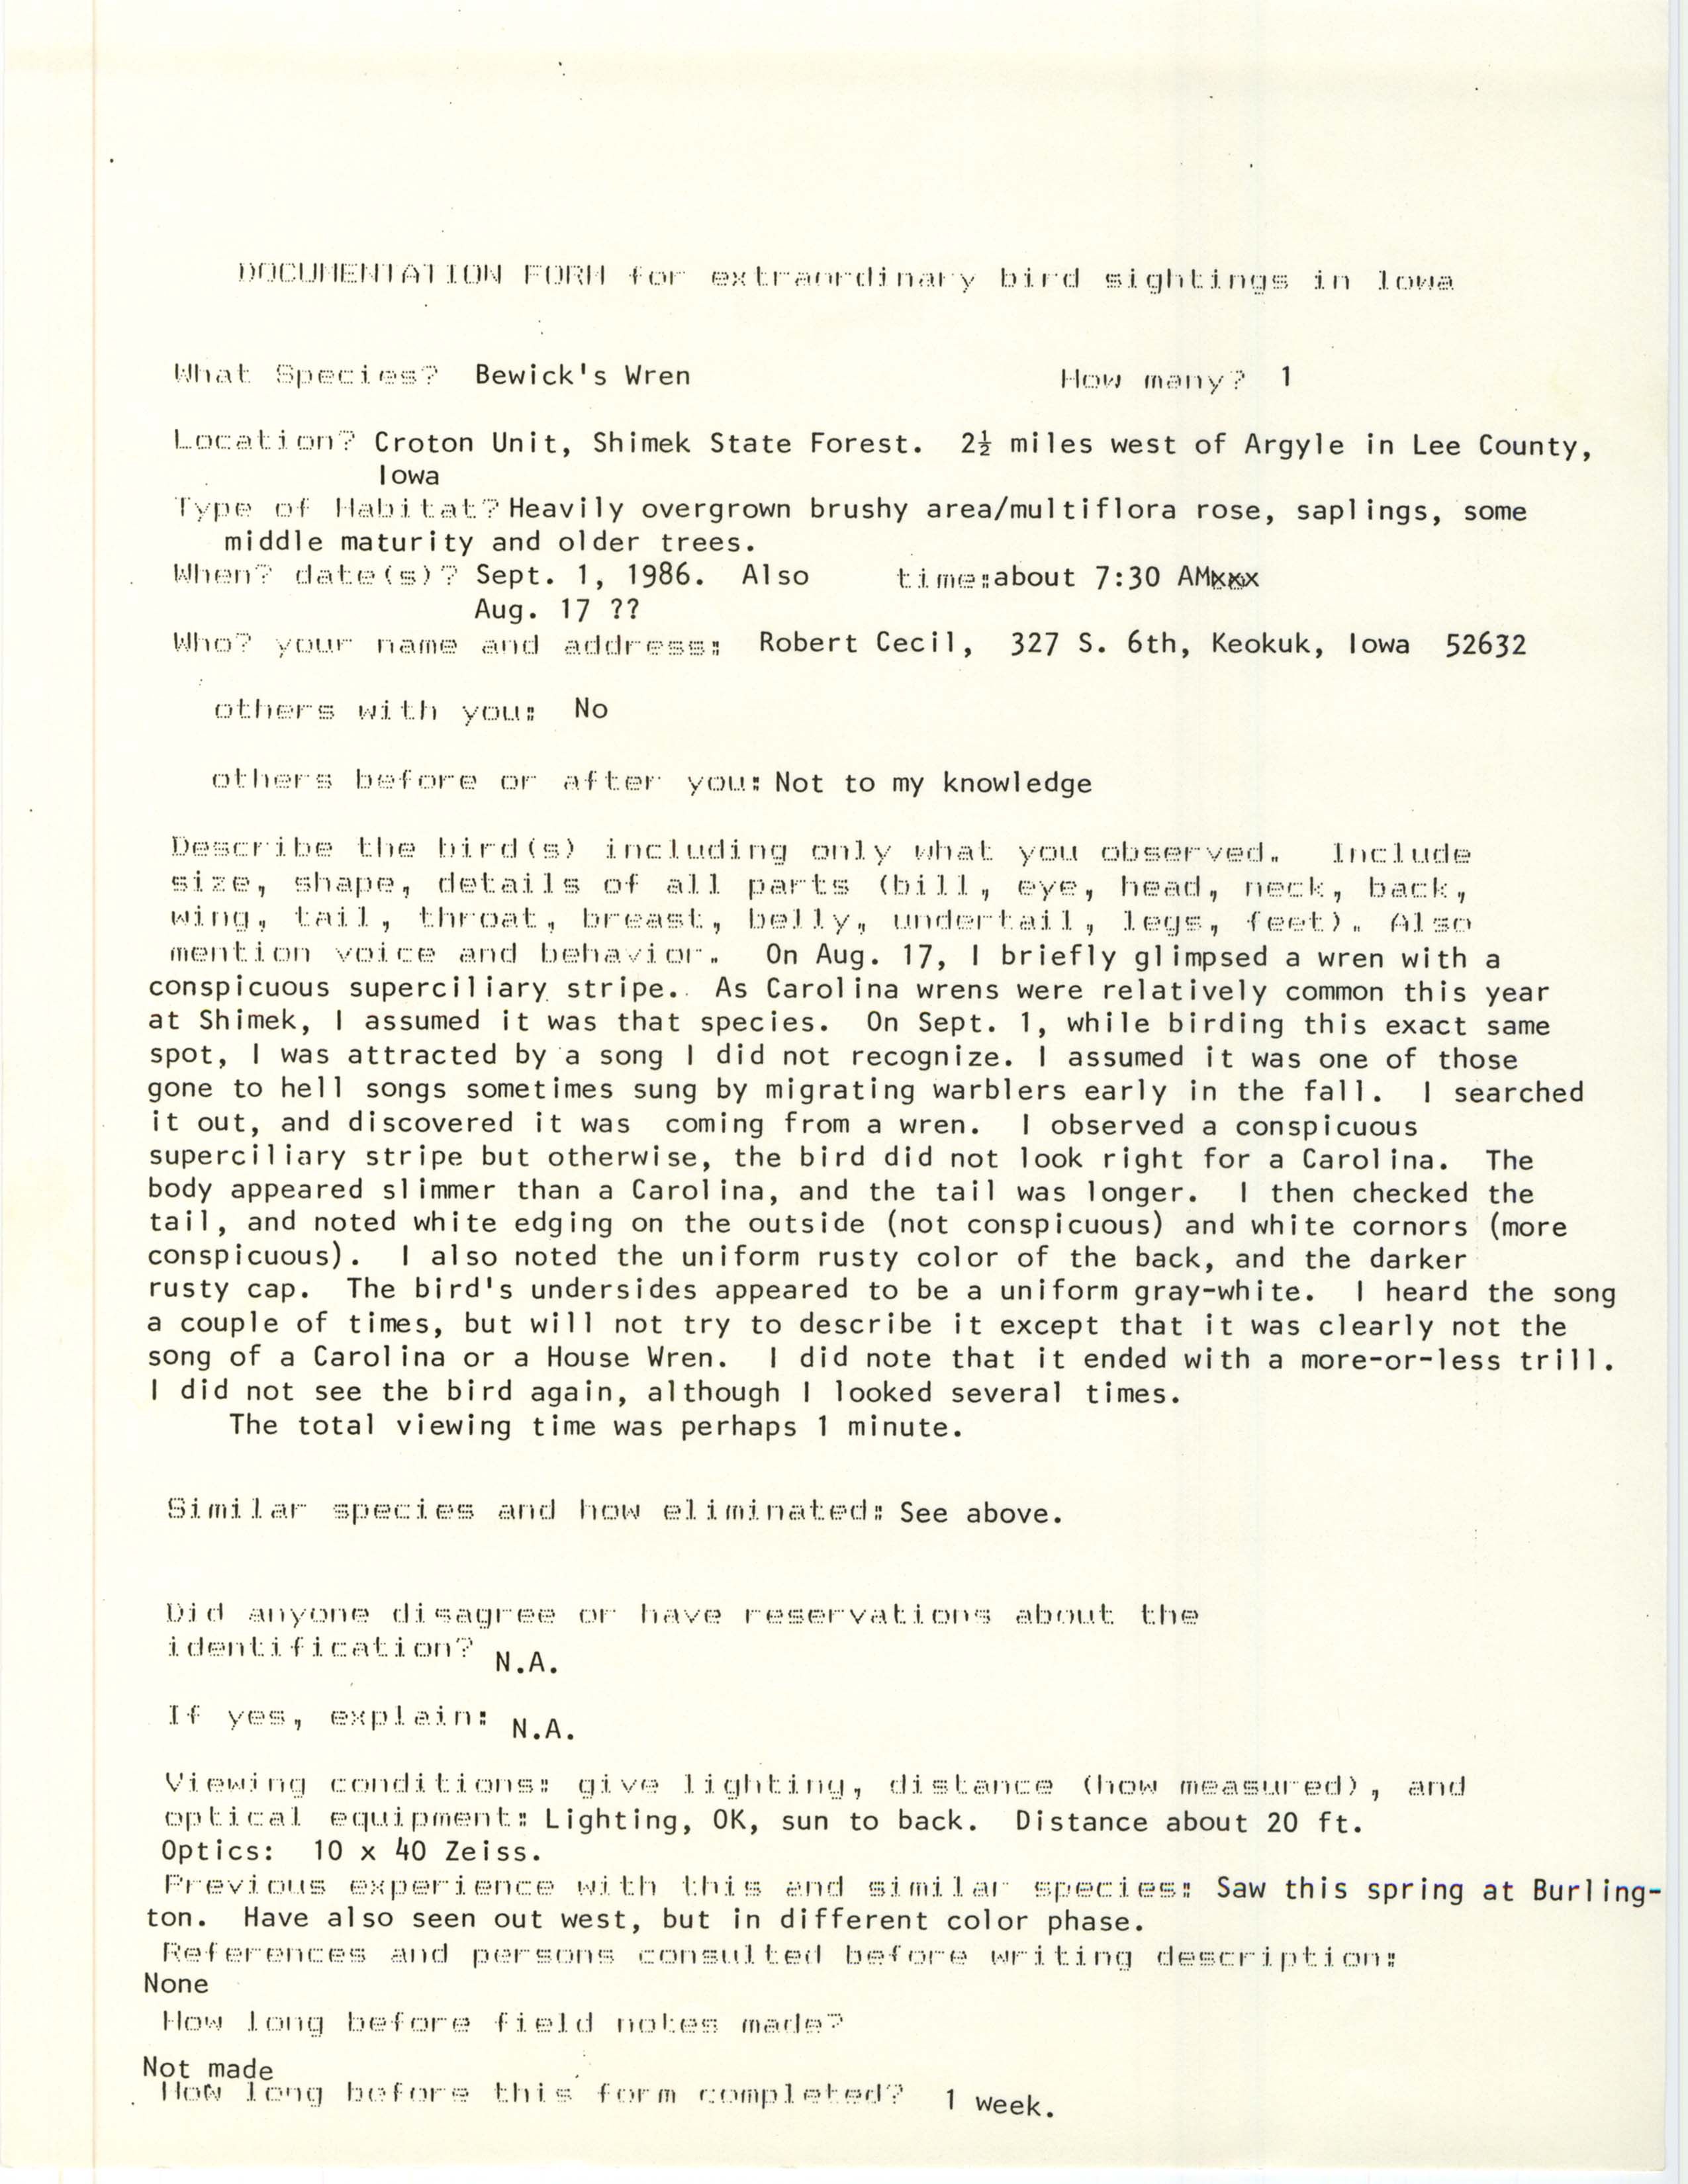 Rare bird documentation form for Bewick's Wren at the Croton Unit in Shimek State Forest, 1986